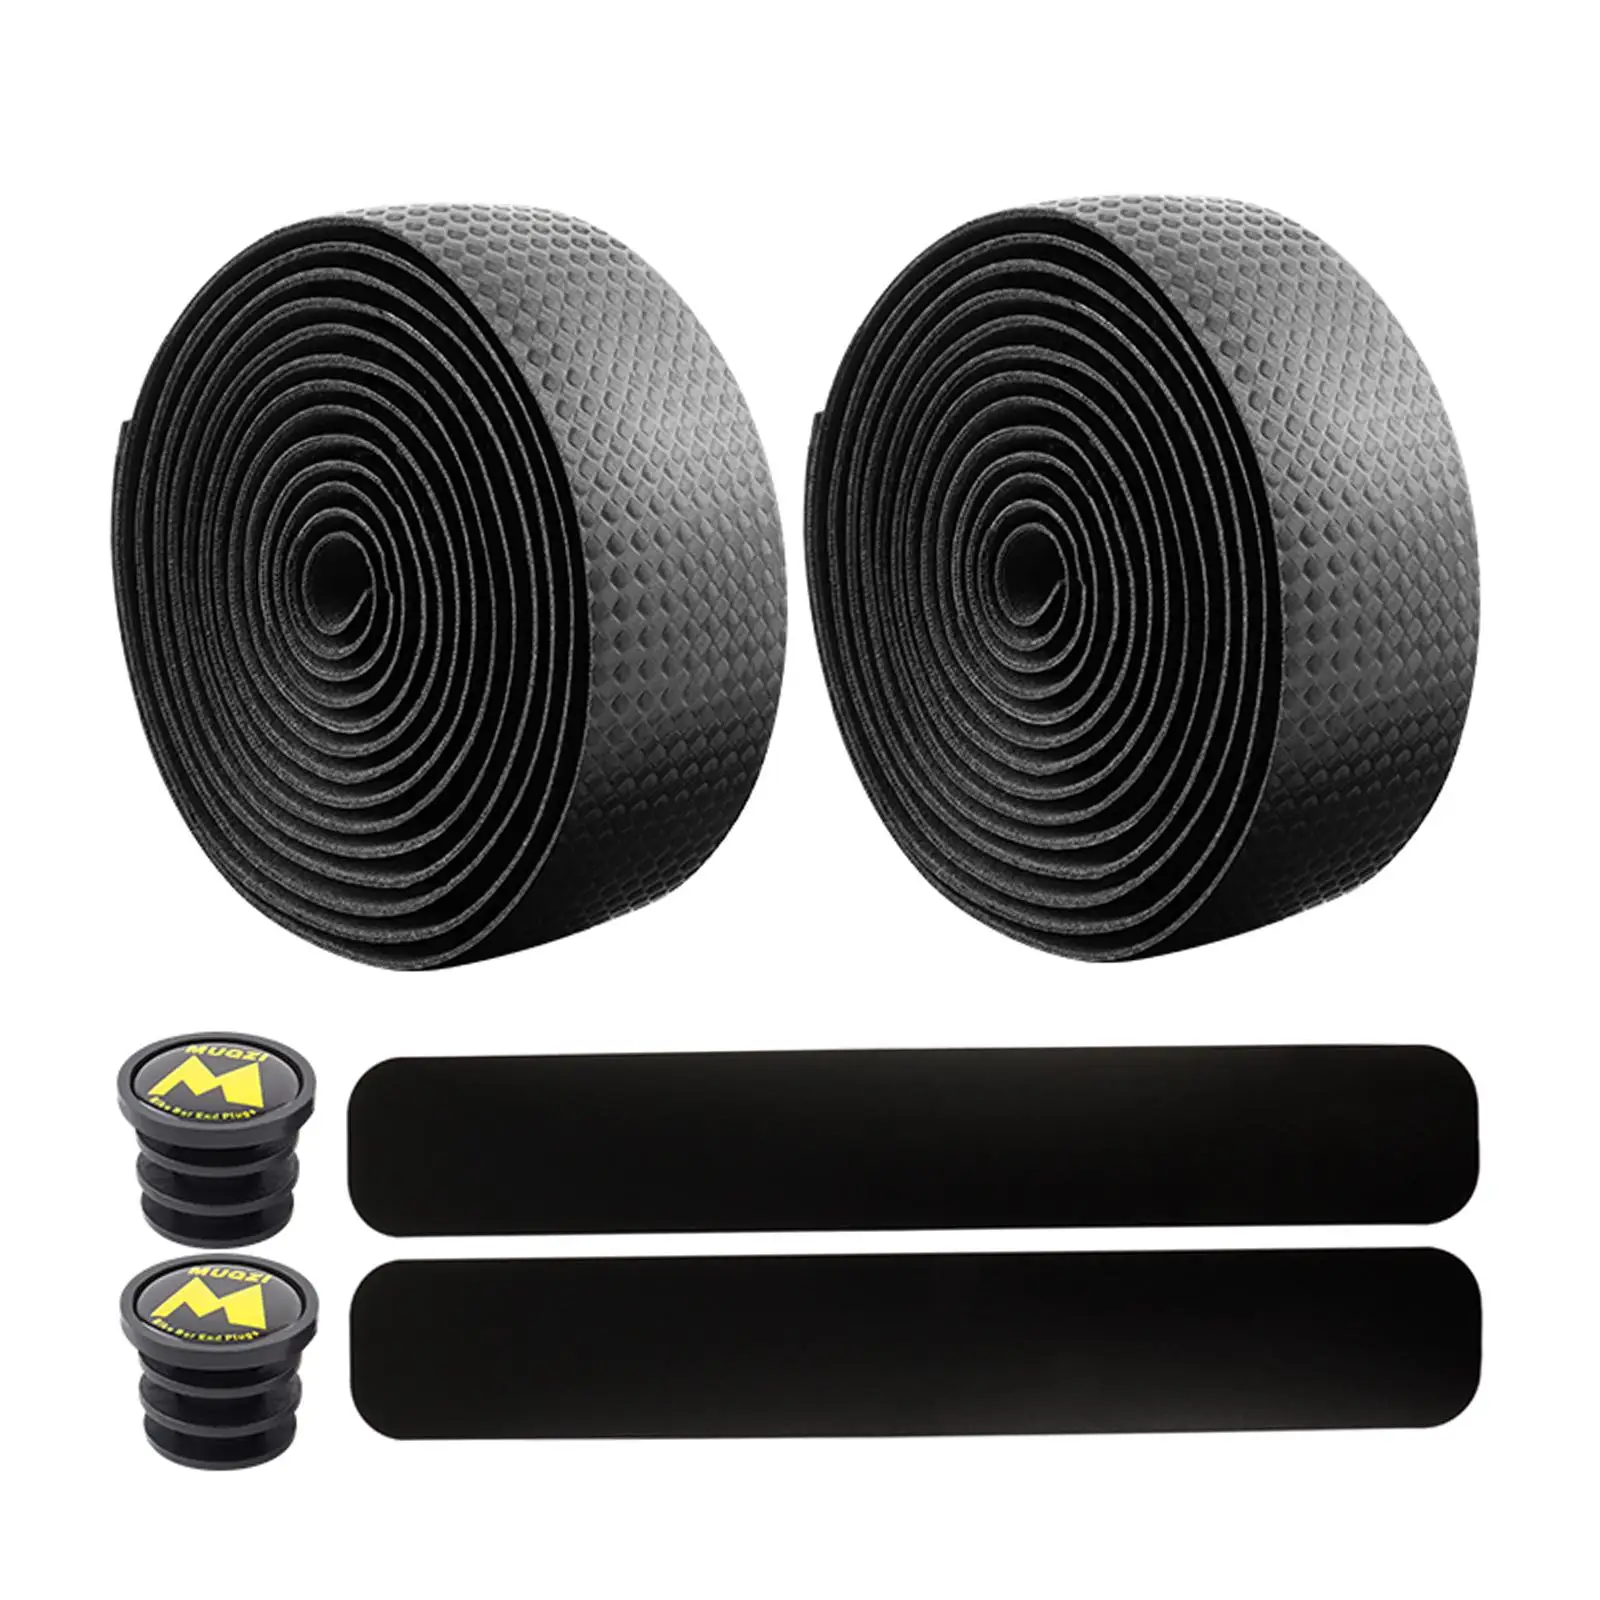 Bike Handlebar Tapes Handle Bar Wraps Mountain Bar Tape with End for Road Bikes